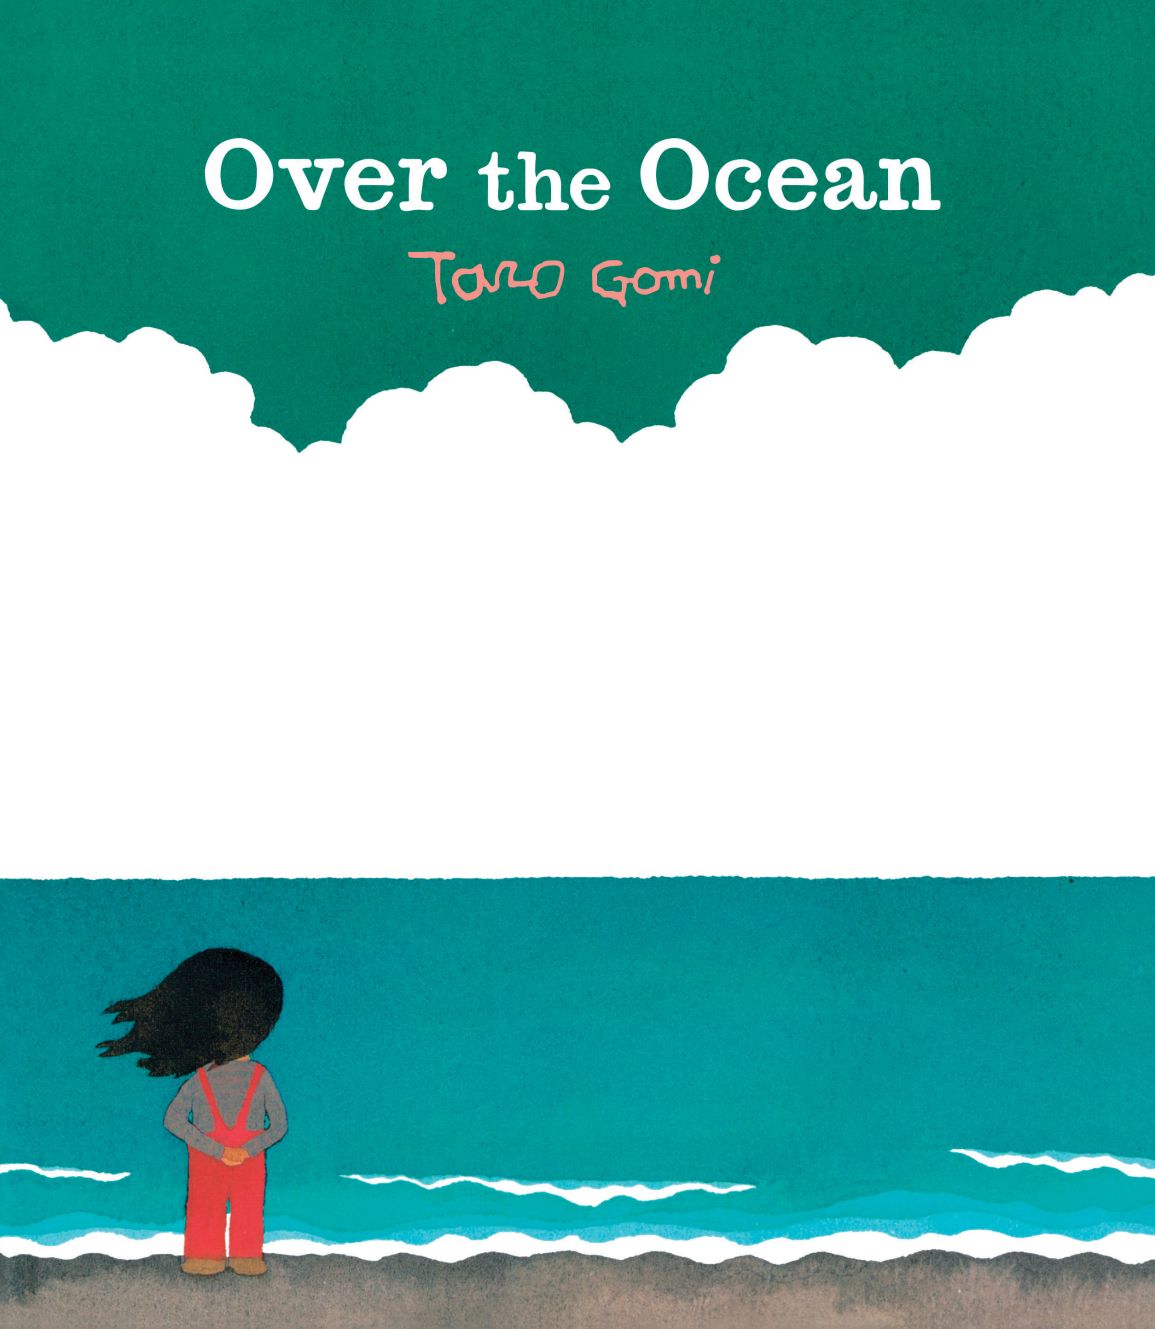 Cover of Over the Ocean featuring an illustration of a child with long hair looking out over the ocean with clouds in the background.